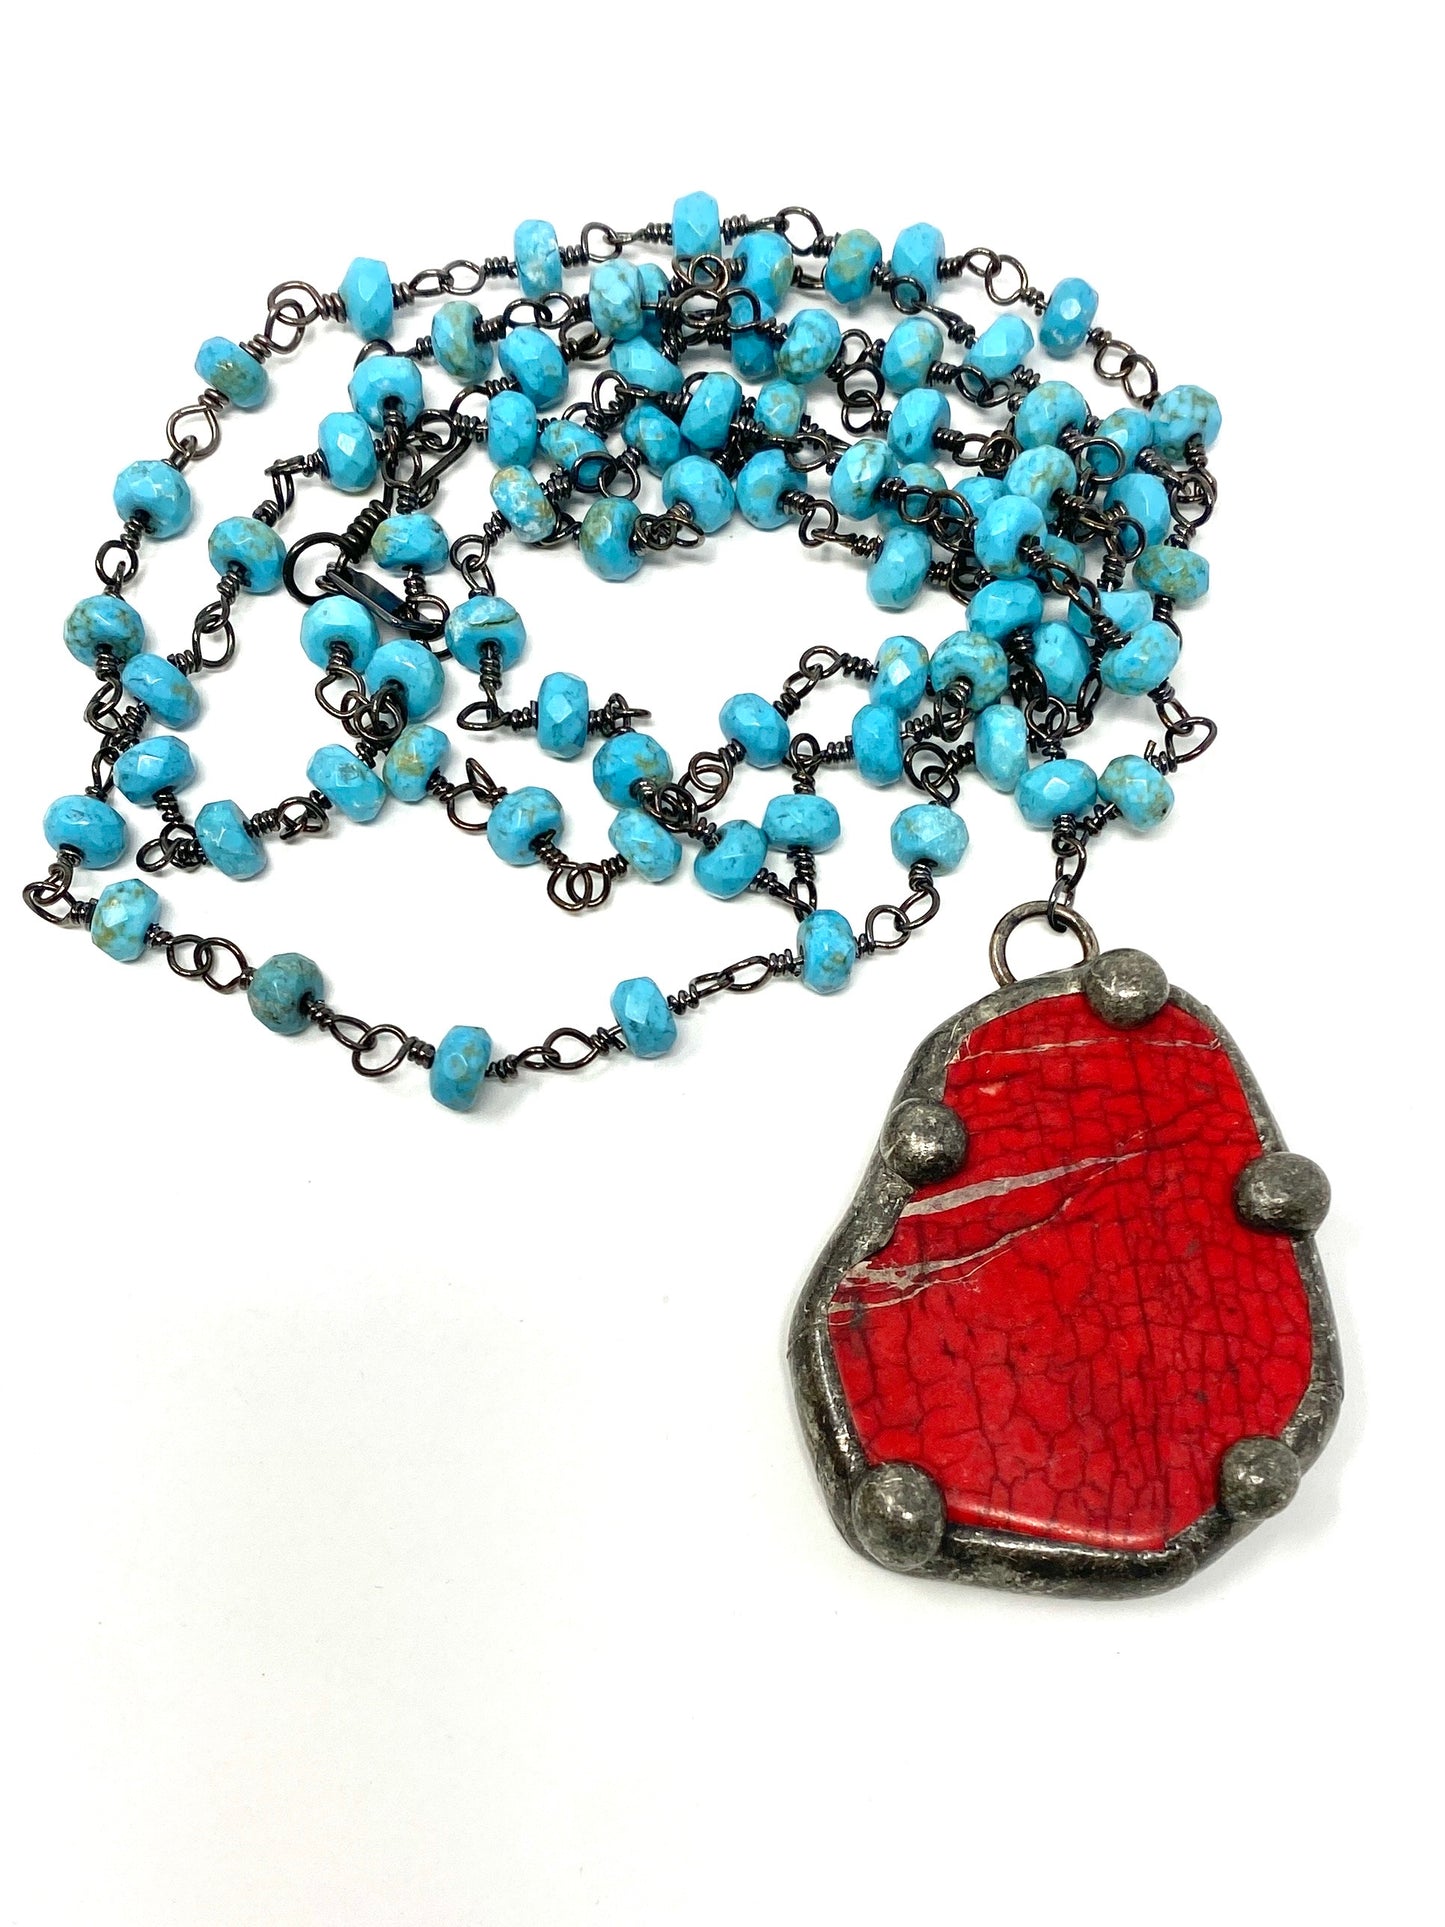 Turquoise Rondelle Rosary Style Chain Necklace With Soldered Red Howlite Pendant